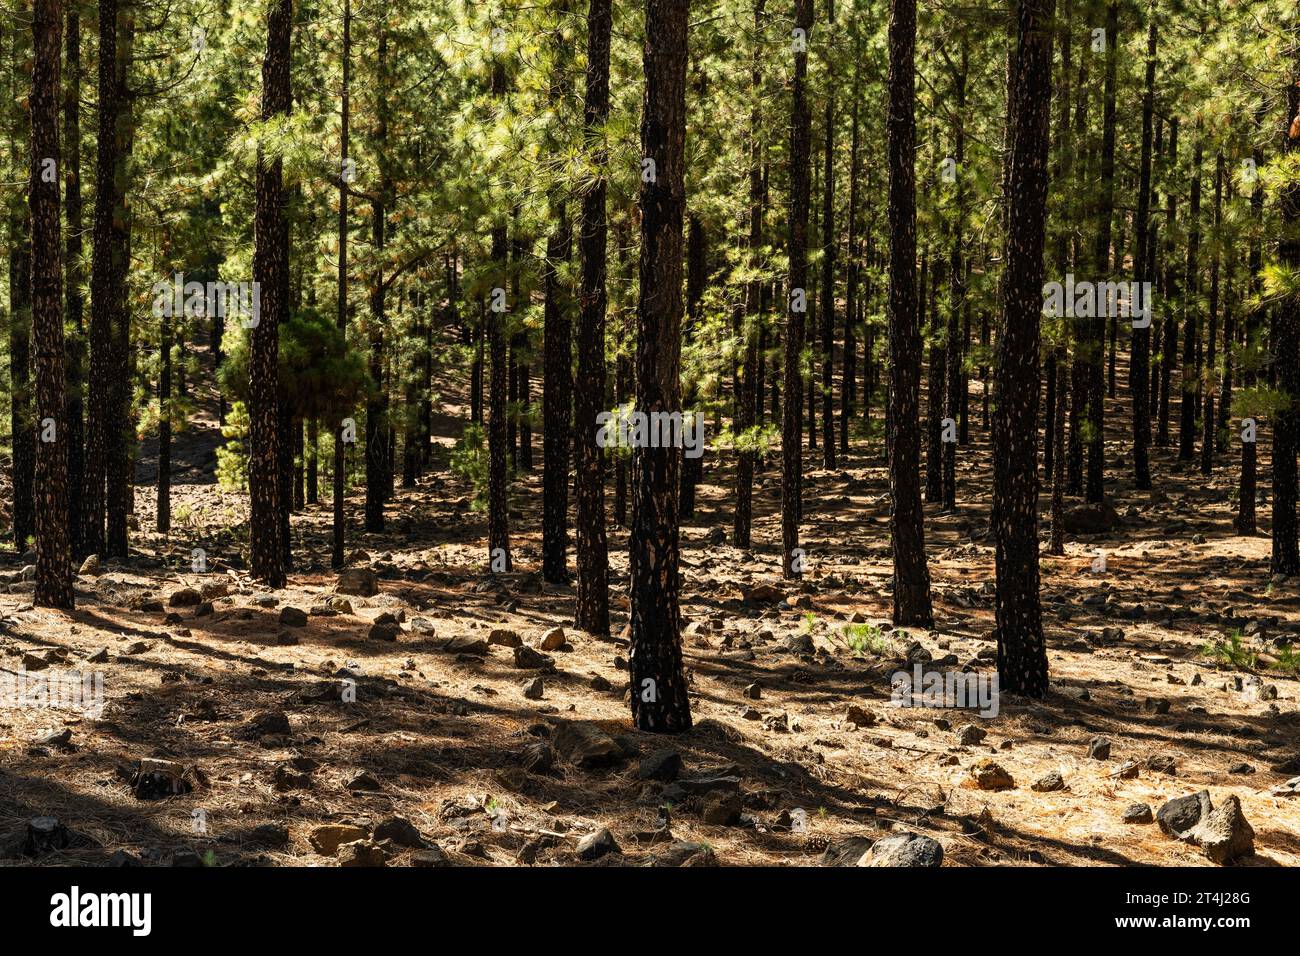 Canarian native pine forest (Pinus canariensis)  with burnt tree trunks after a forest fire a few years ago but recovering well with new growth Stock Photo